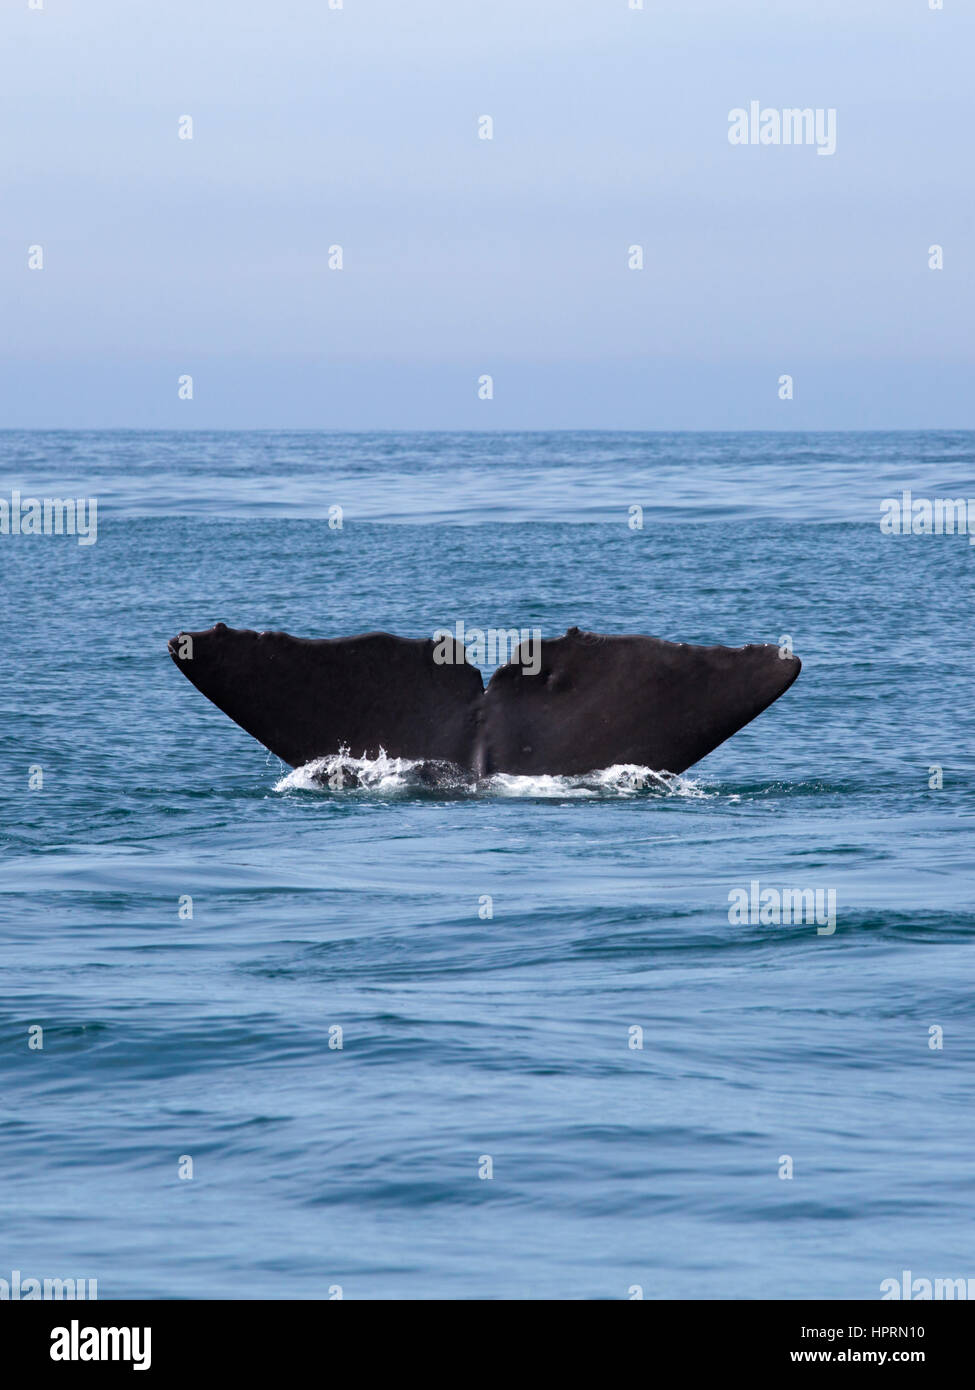 Kaikoura, Canterbury, New Zealand. The tail flukes of a sperm whale (Physeter macrocephalus) disappearing into the Pacific Ocean. Stock Photo